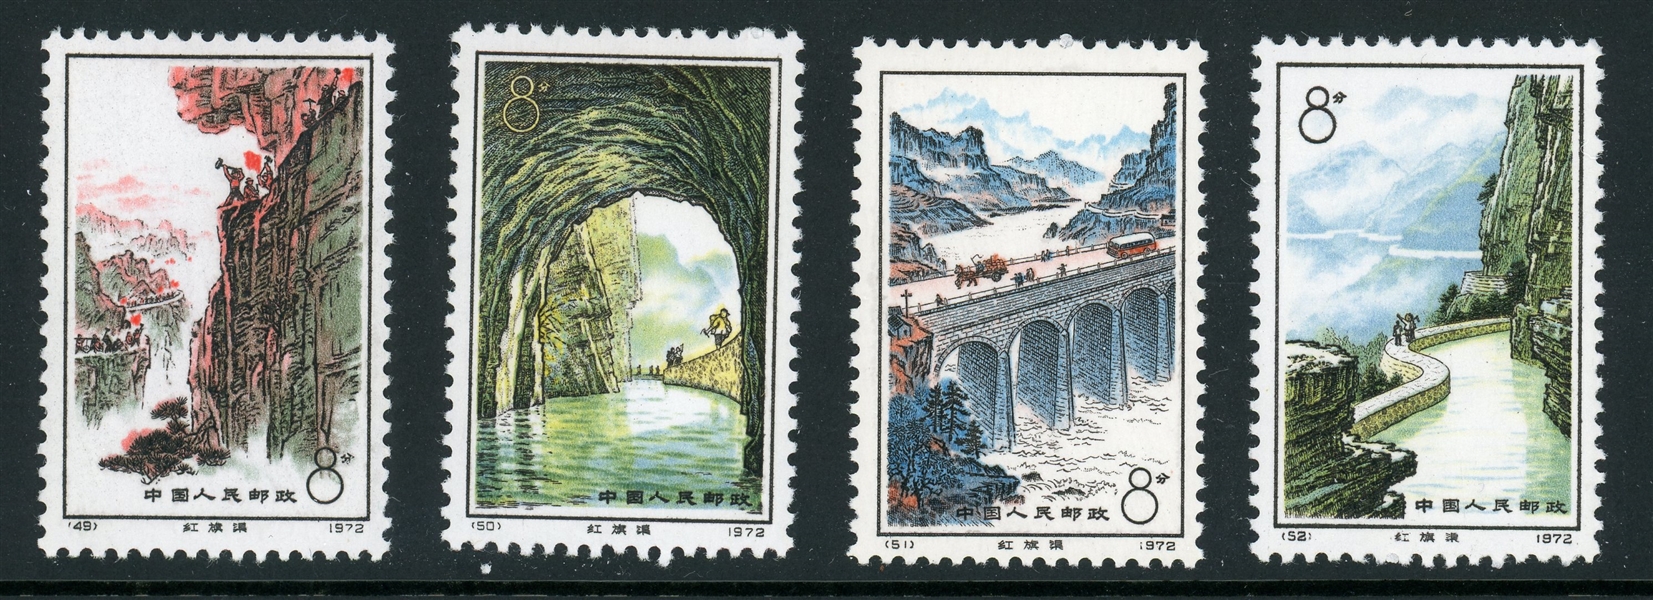 People's Republic of China Scott 1104-1107 MH F-VF Complete Set - 1972 Red Flag Canal (SCV $140)